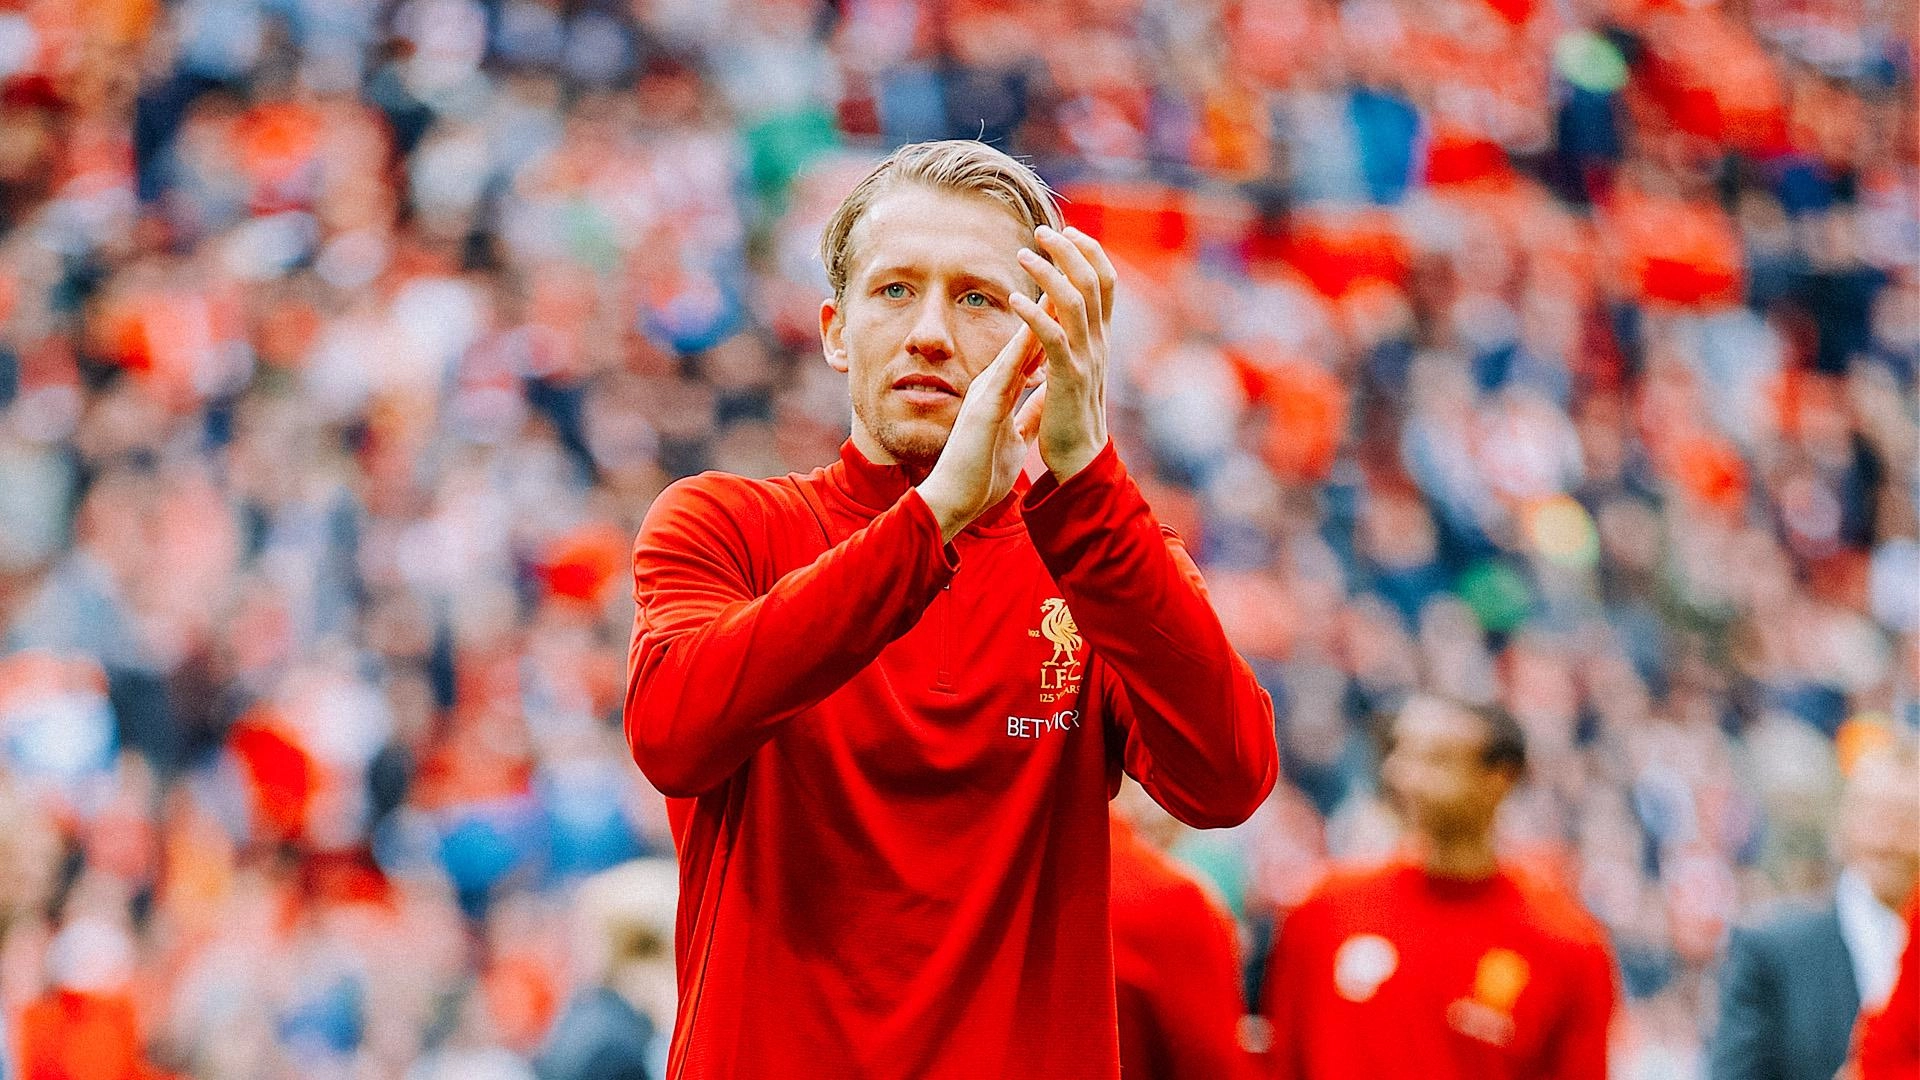 Liverpool FC — Lucas Leiva announces retirement from football